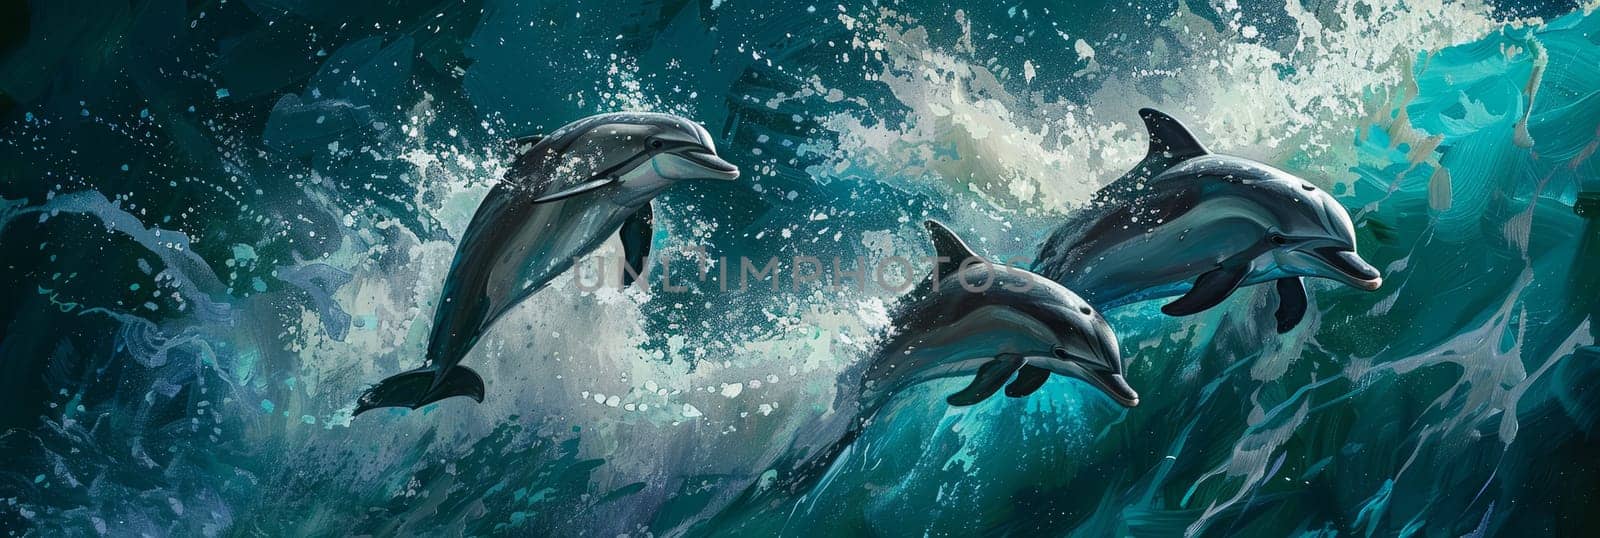 Three dolphins are jumping out of the water in a wave by AI generated image.